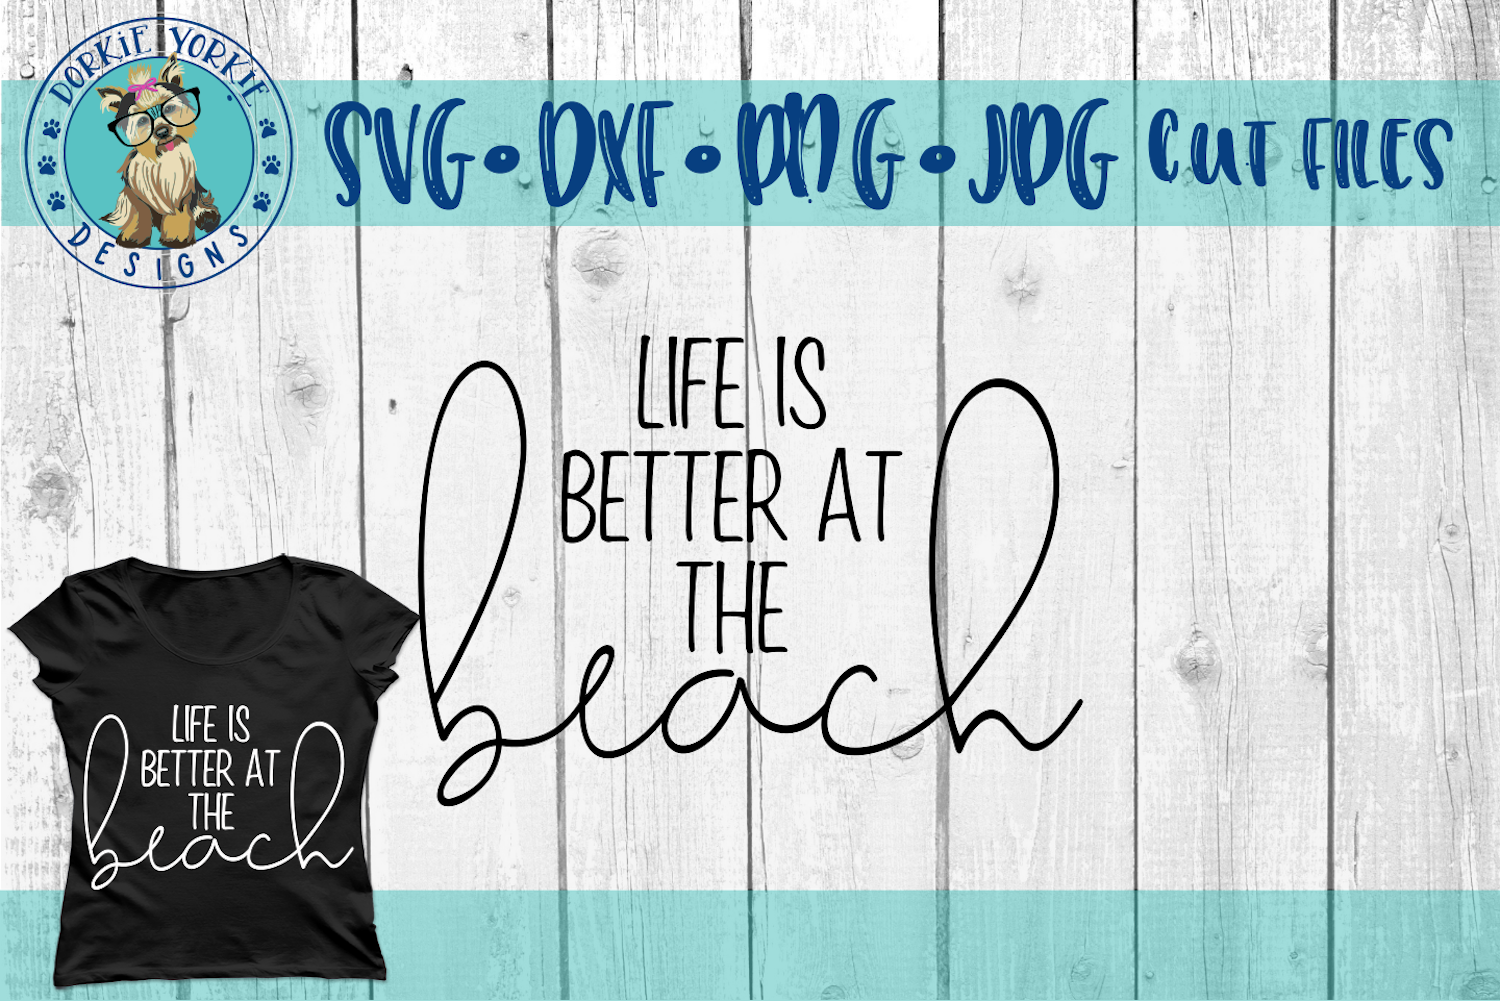 Life is better at the Beach - SVG Cut File